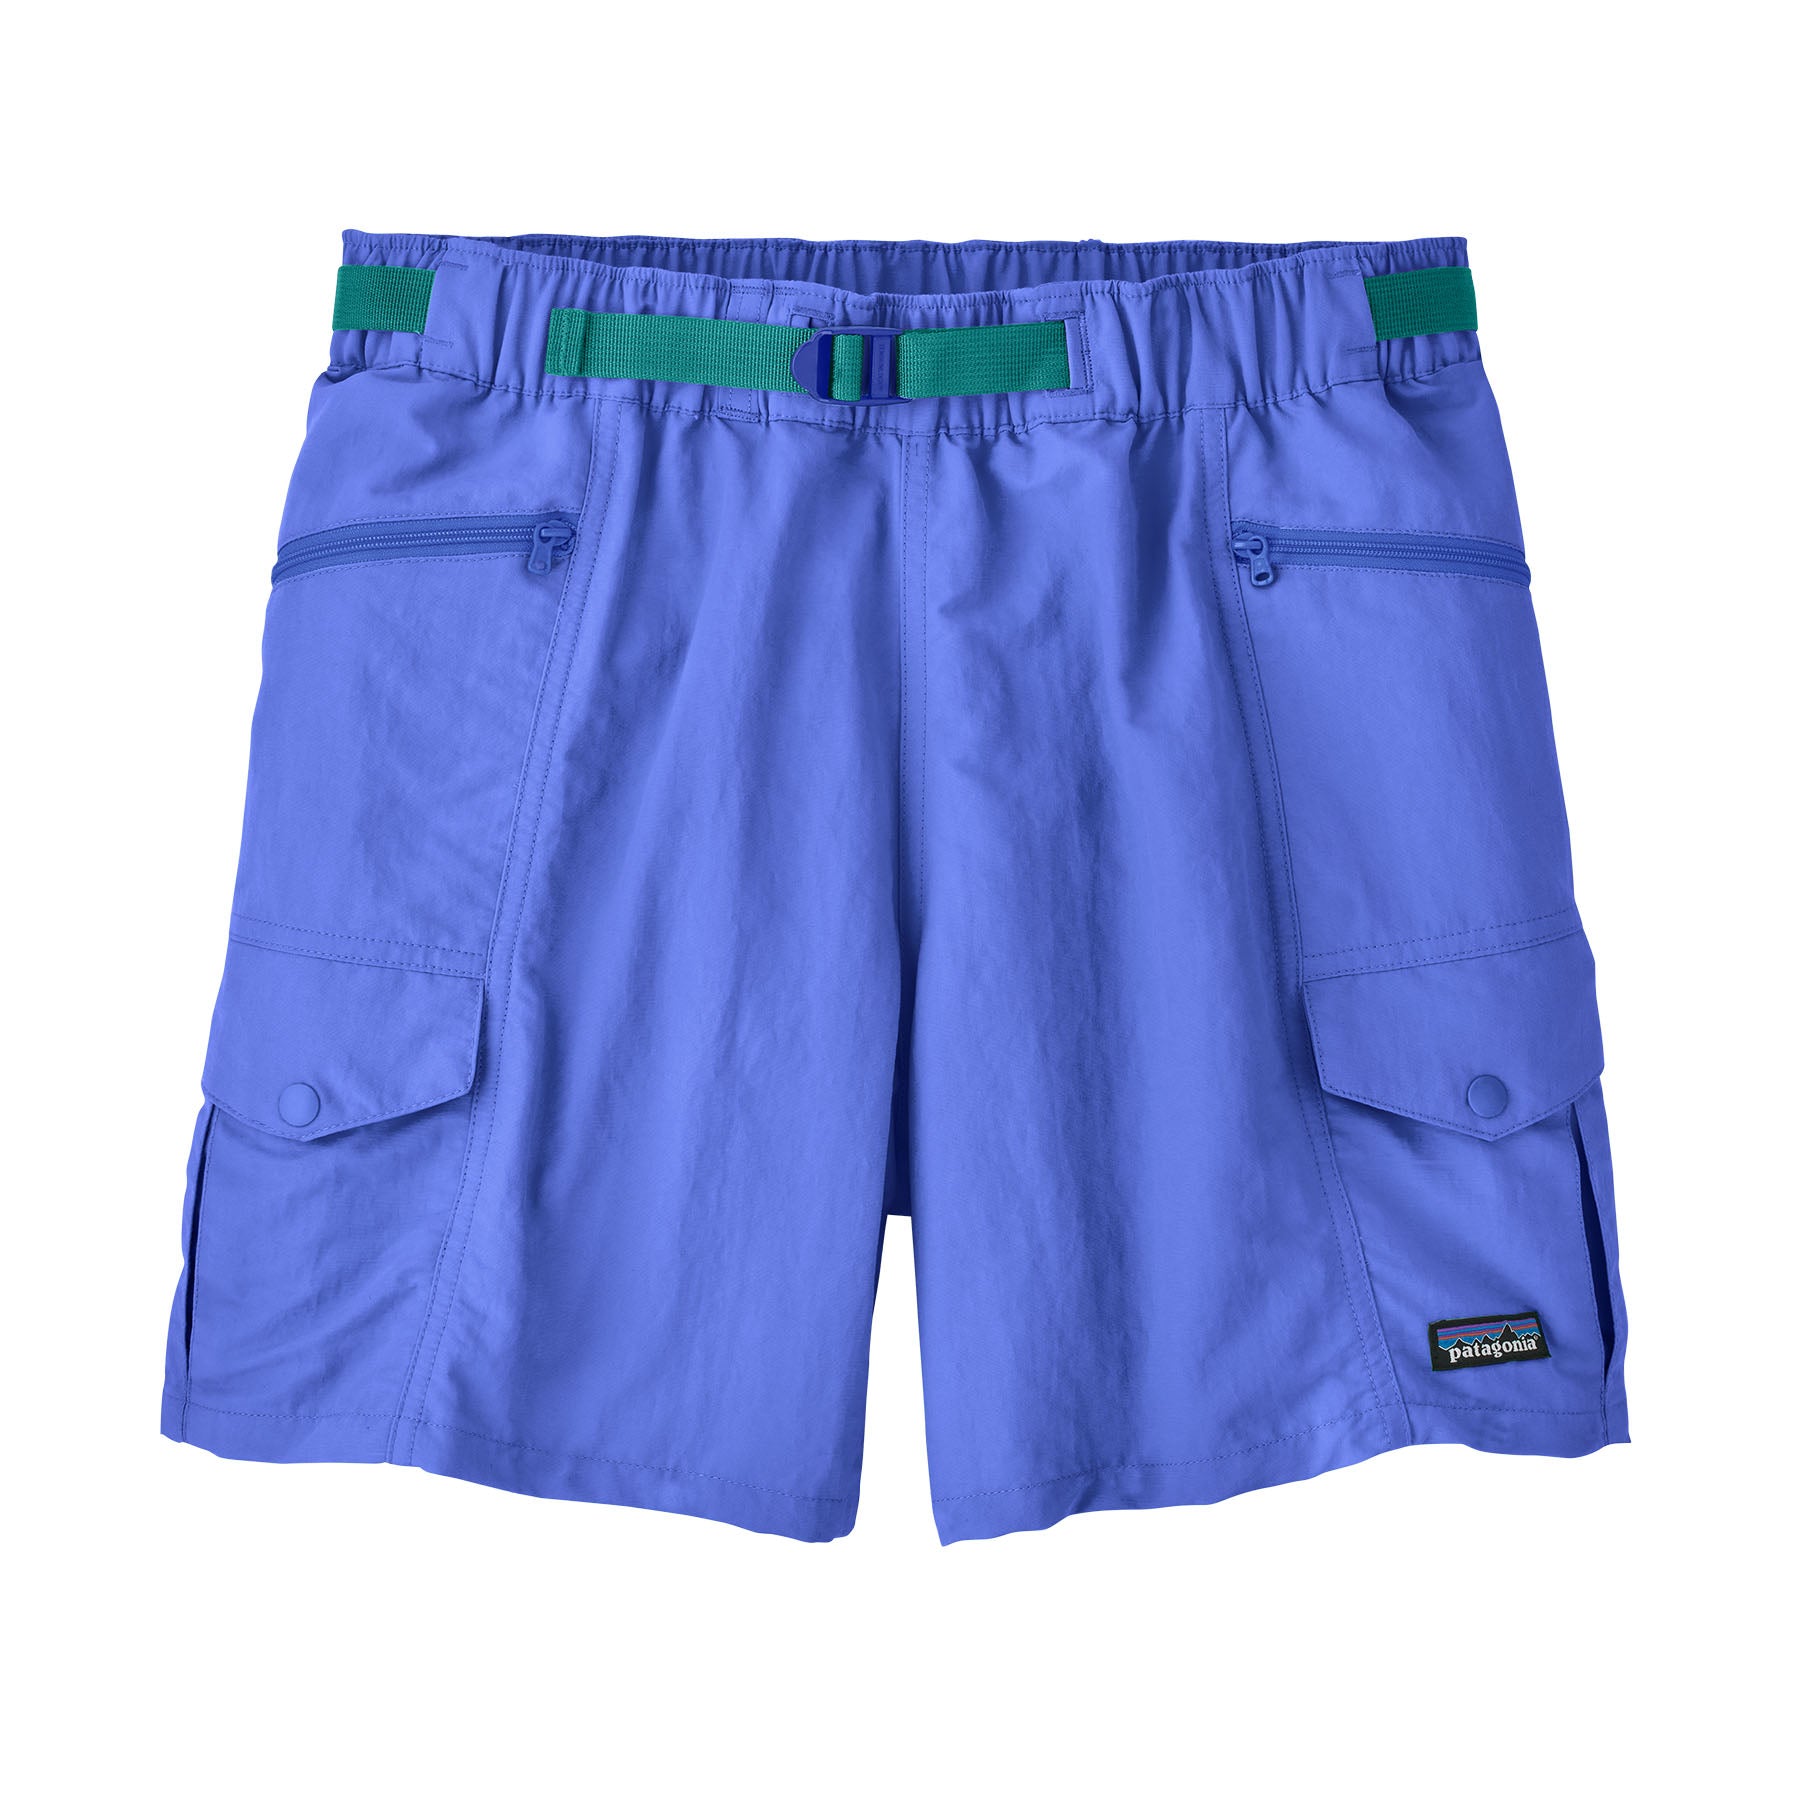 Women's Shorts for Outdoor & Everyday